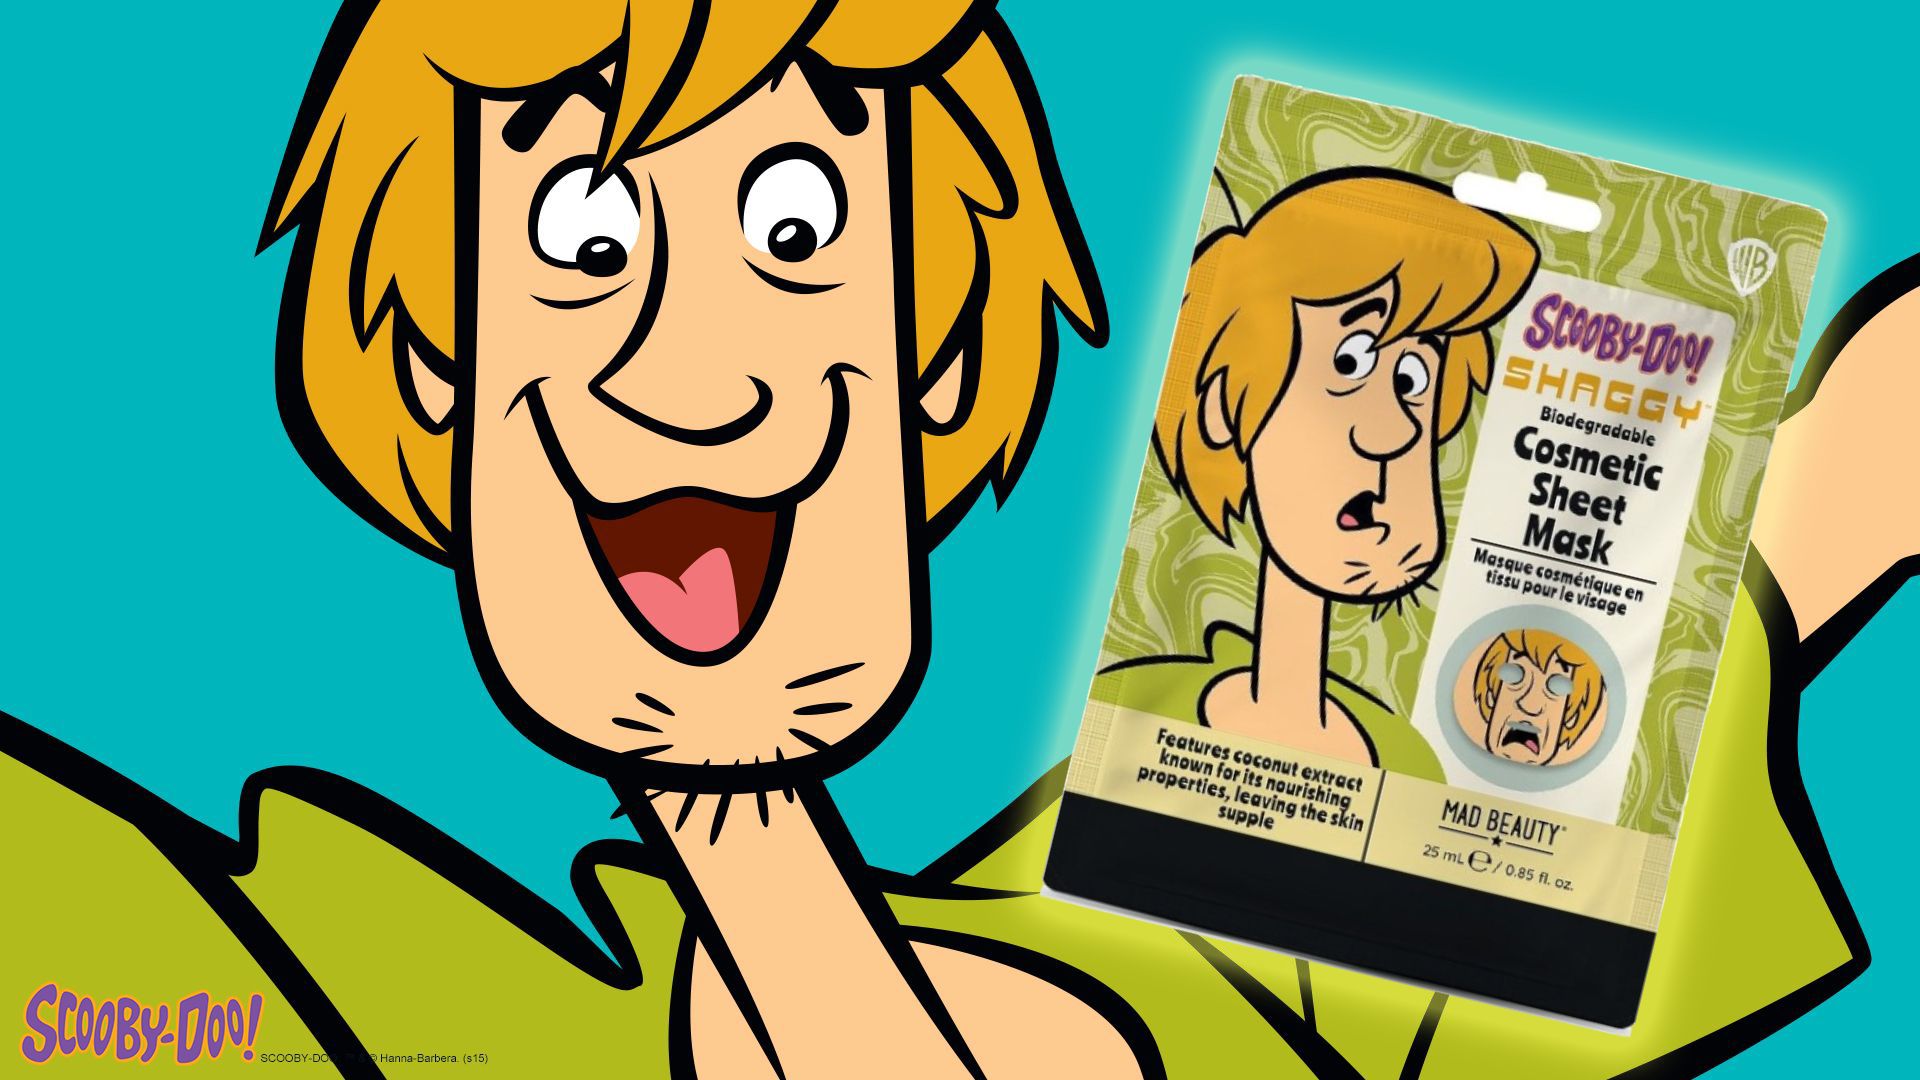 Mad Beauty Scooby Doo Shaggy Face Mask banner